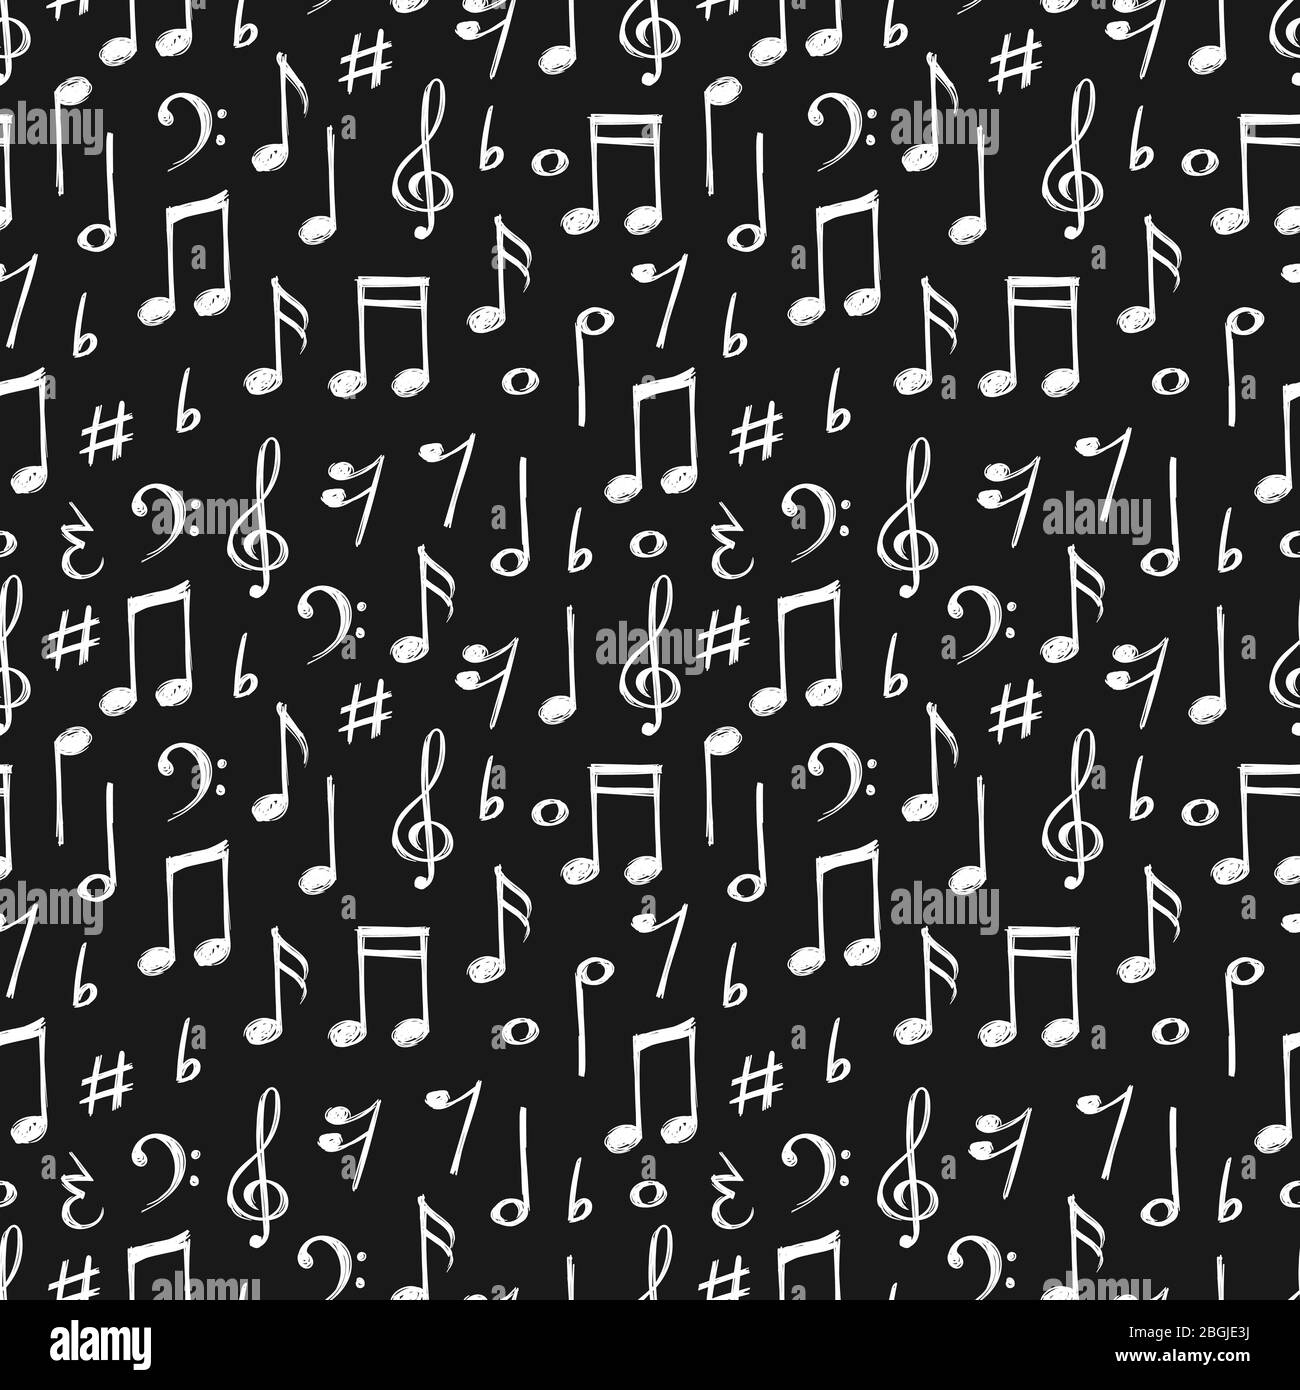 Chalk music notes and signs seamless pattern. Hand drawn music background black white, vector illustration Stock Vector